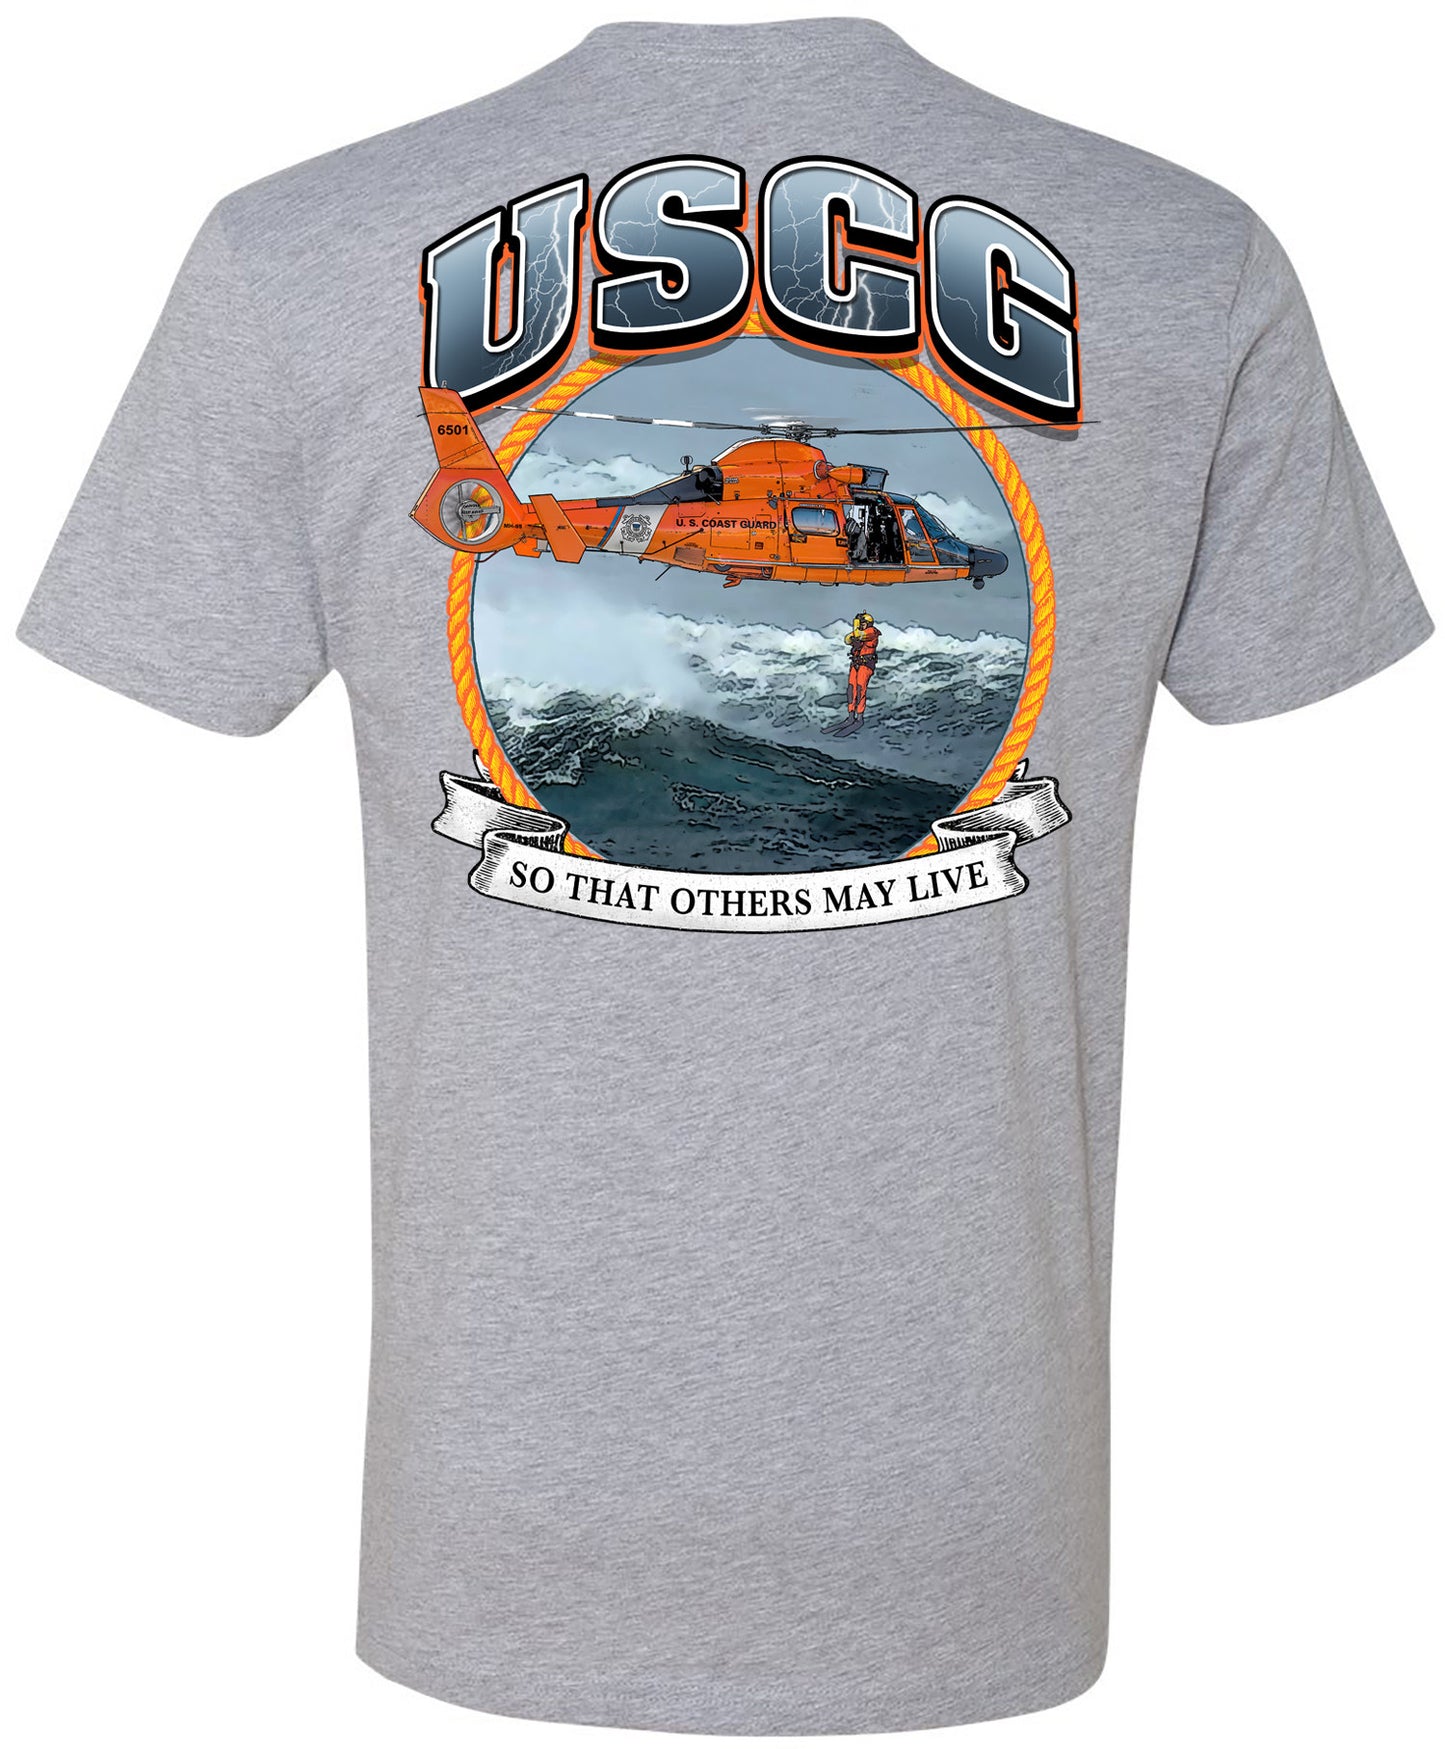 H-65 Helicopter Cotton T-shirt